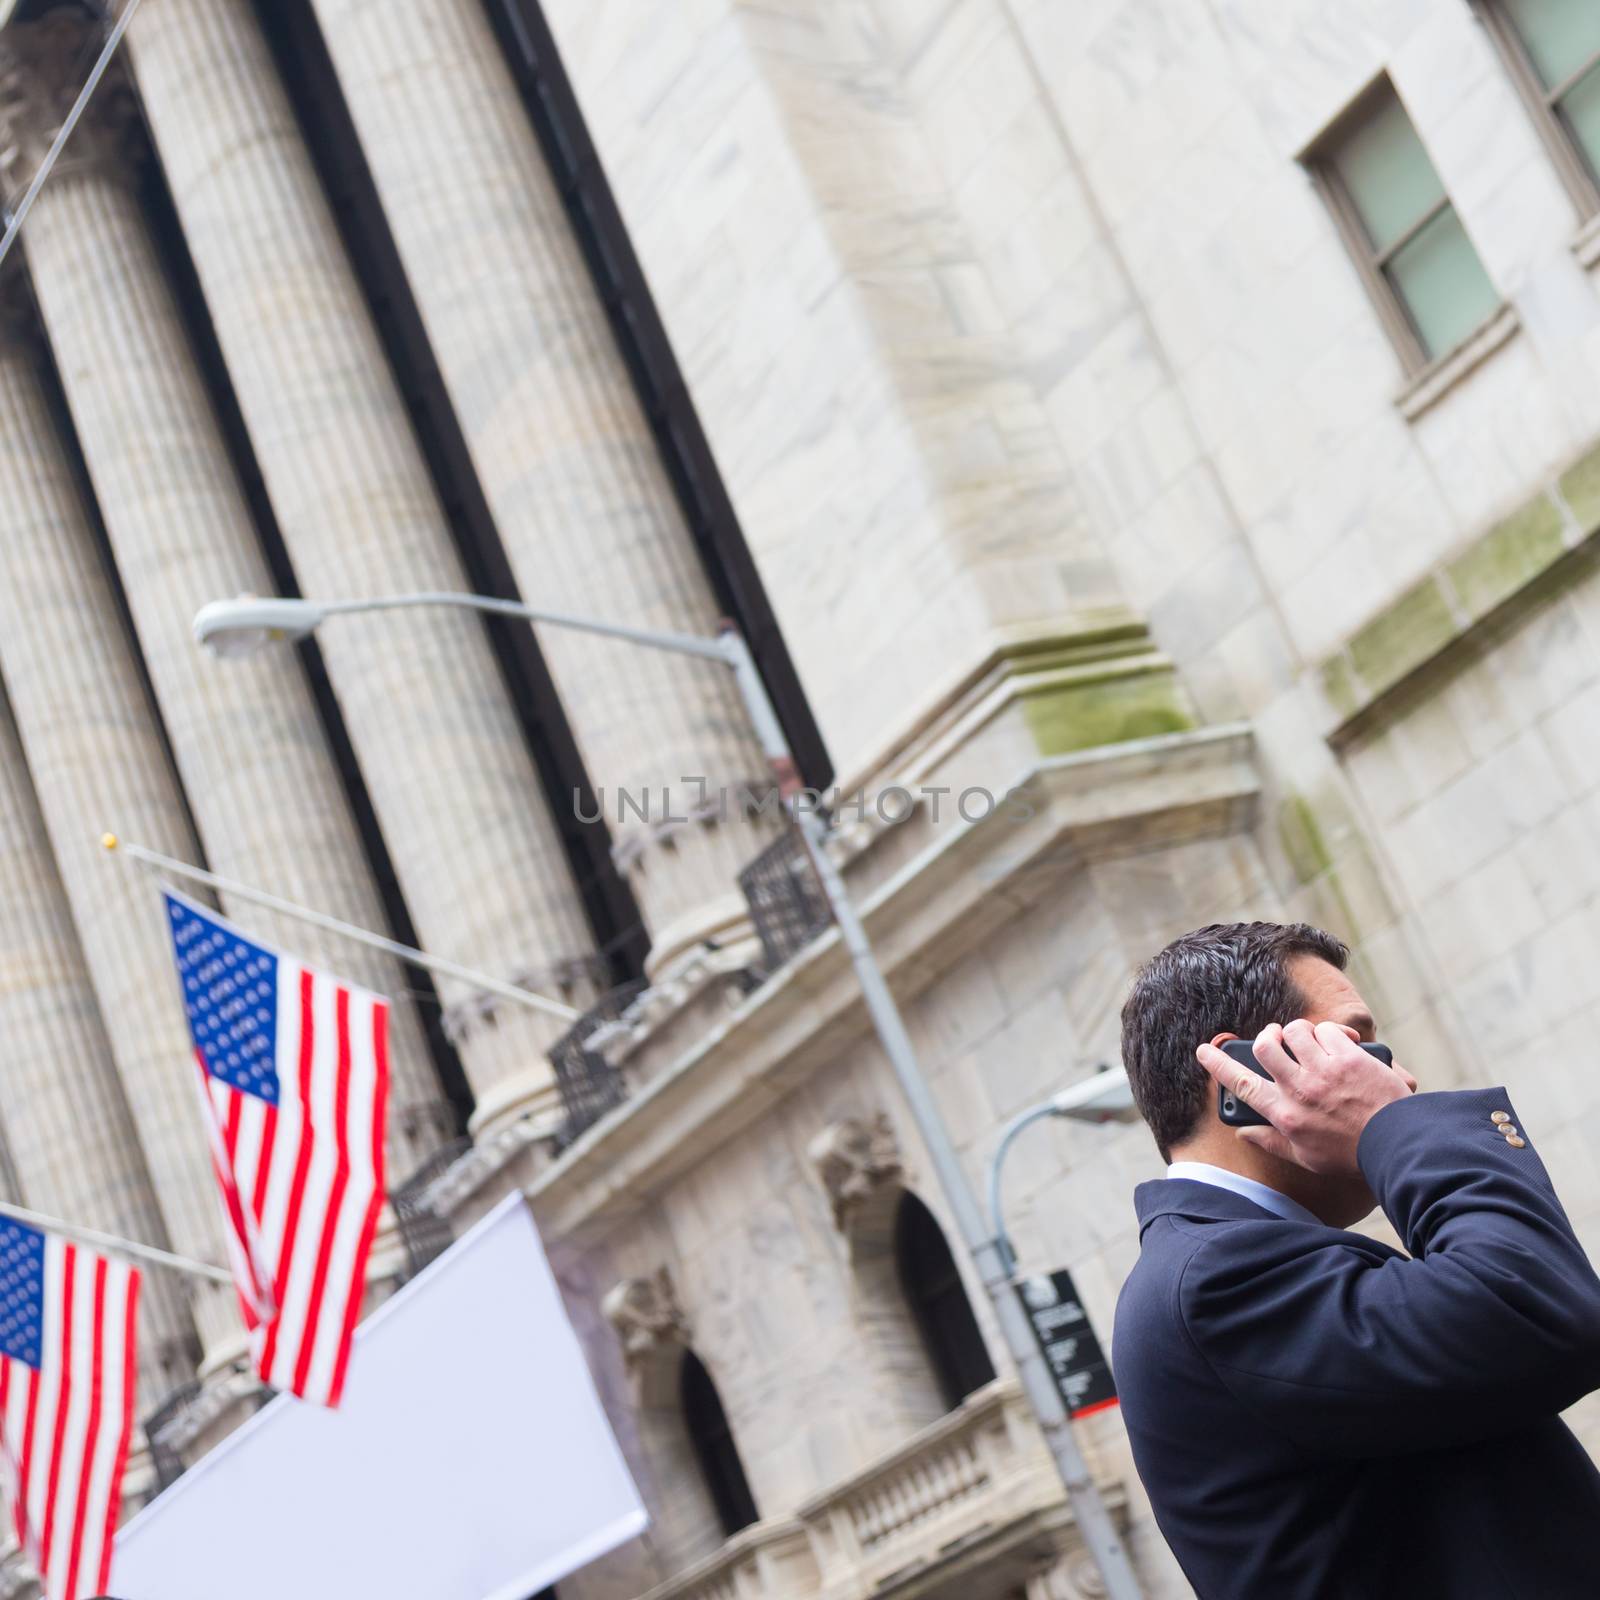 New York City, United States of America - March 26: Businessman talking on phone on Wall street in front of New York Stock Exchange on March 26, 2015.